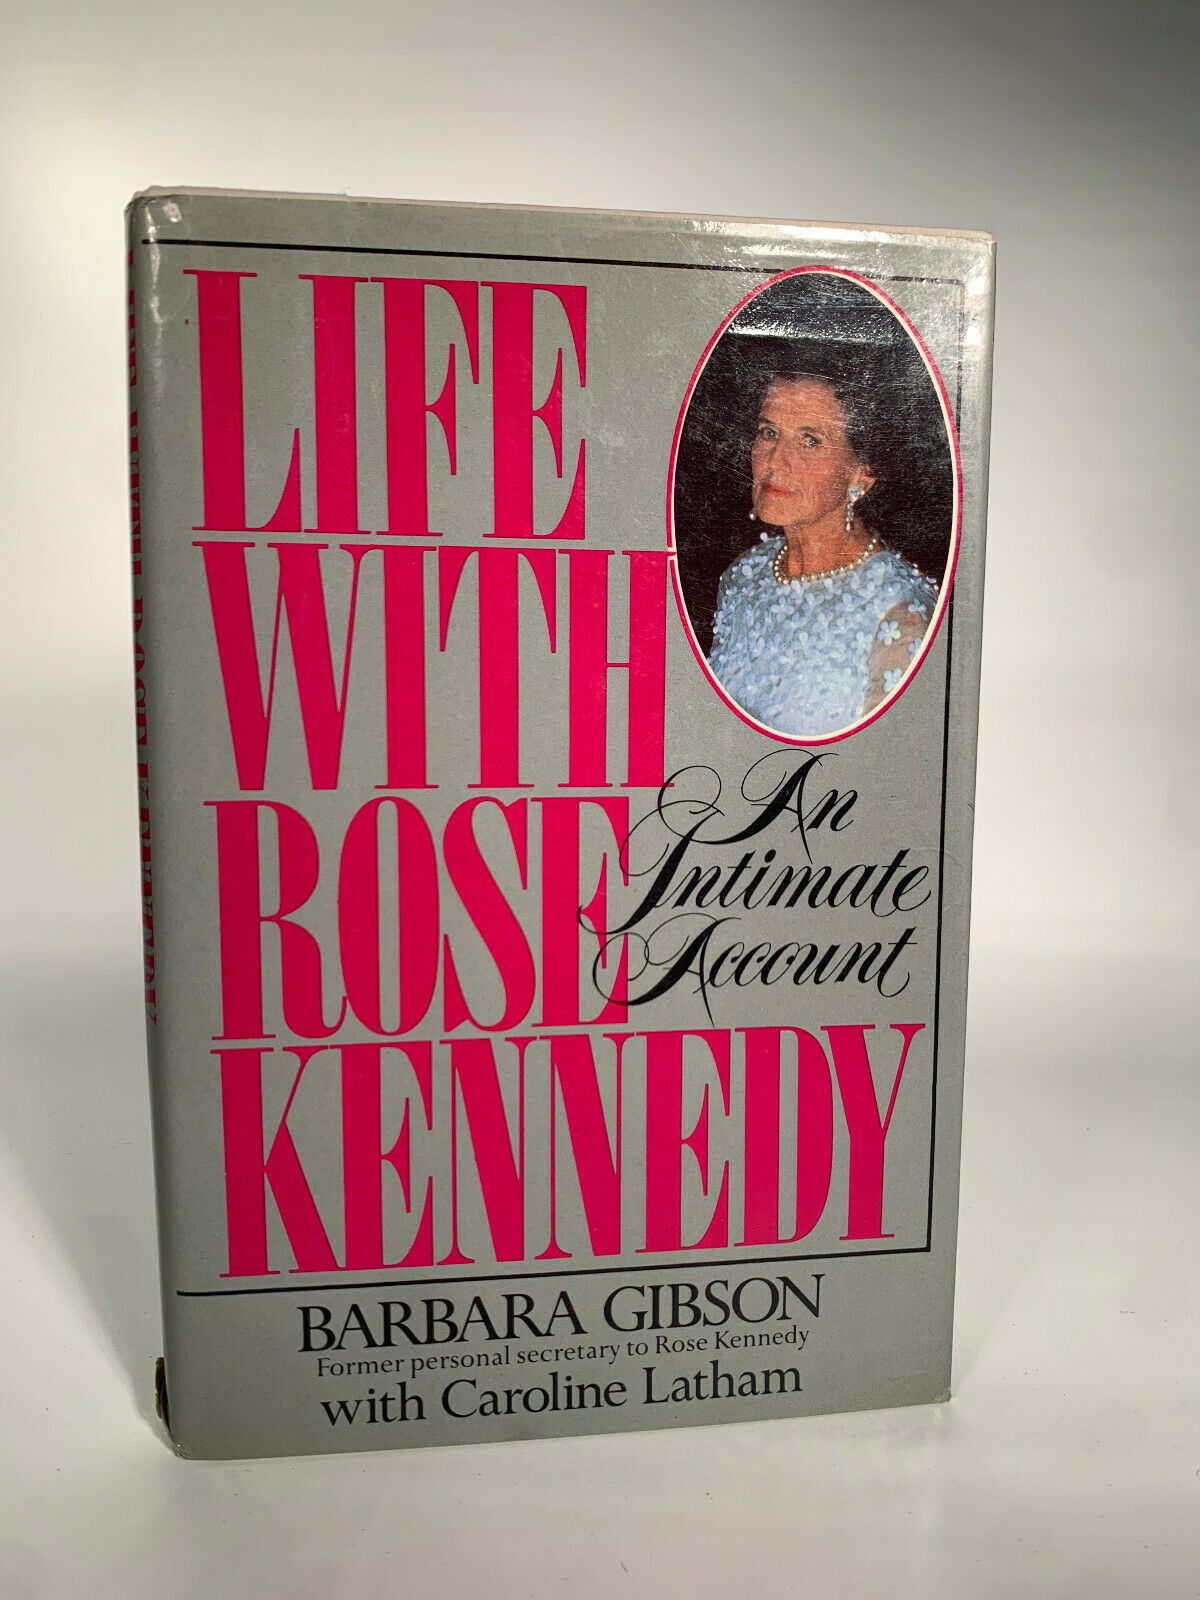 Life with Rose Kennedy by Barbara Gibson